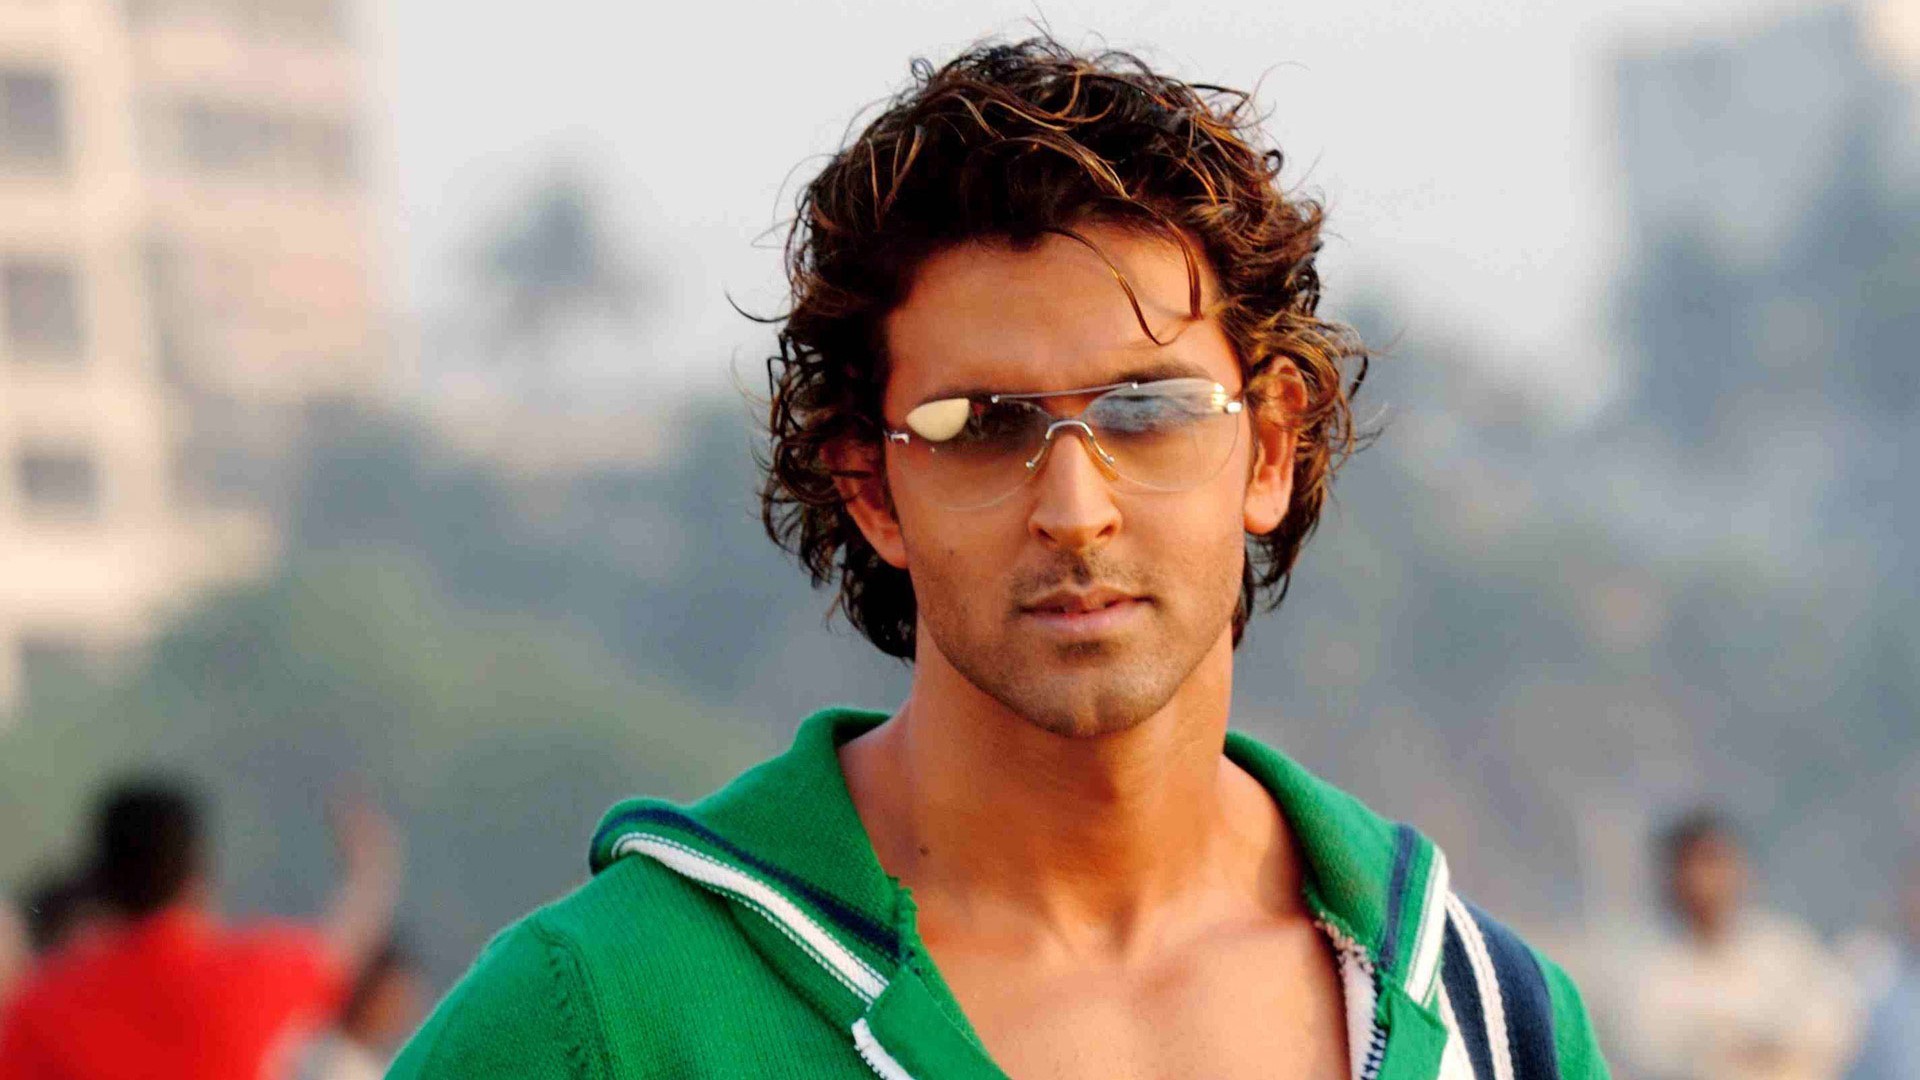 Hrithik Roshan Wallpapers HD Pictures One HD Wallpaper Pictures